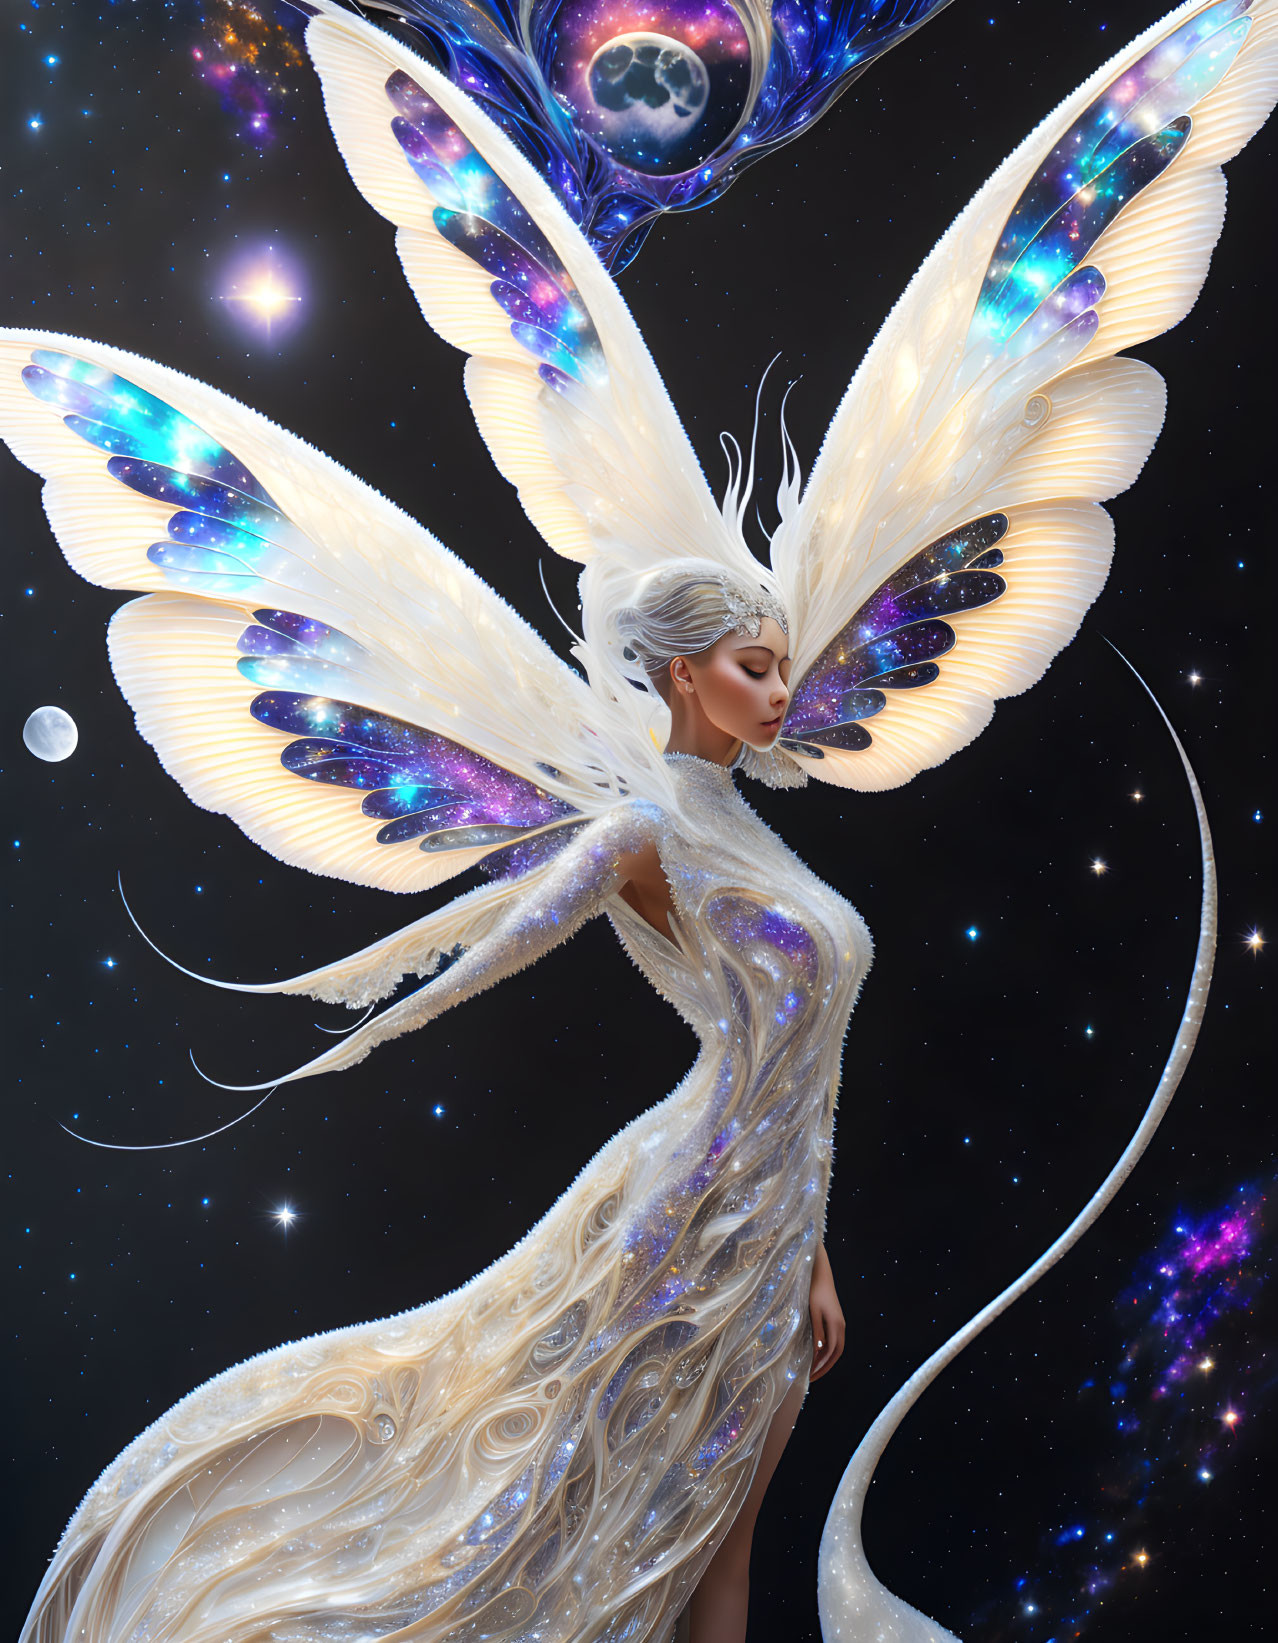 Celestial being with butterfly-like wings in starry cosmos